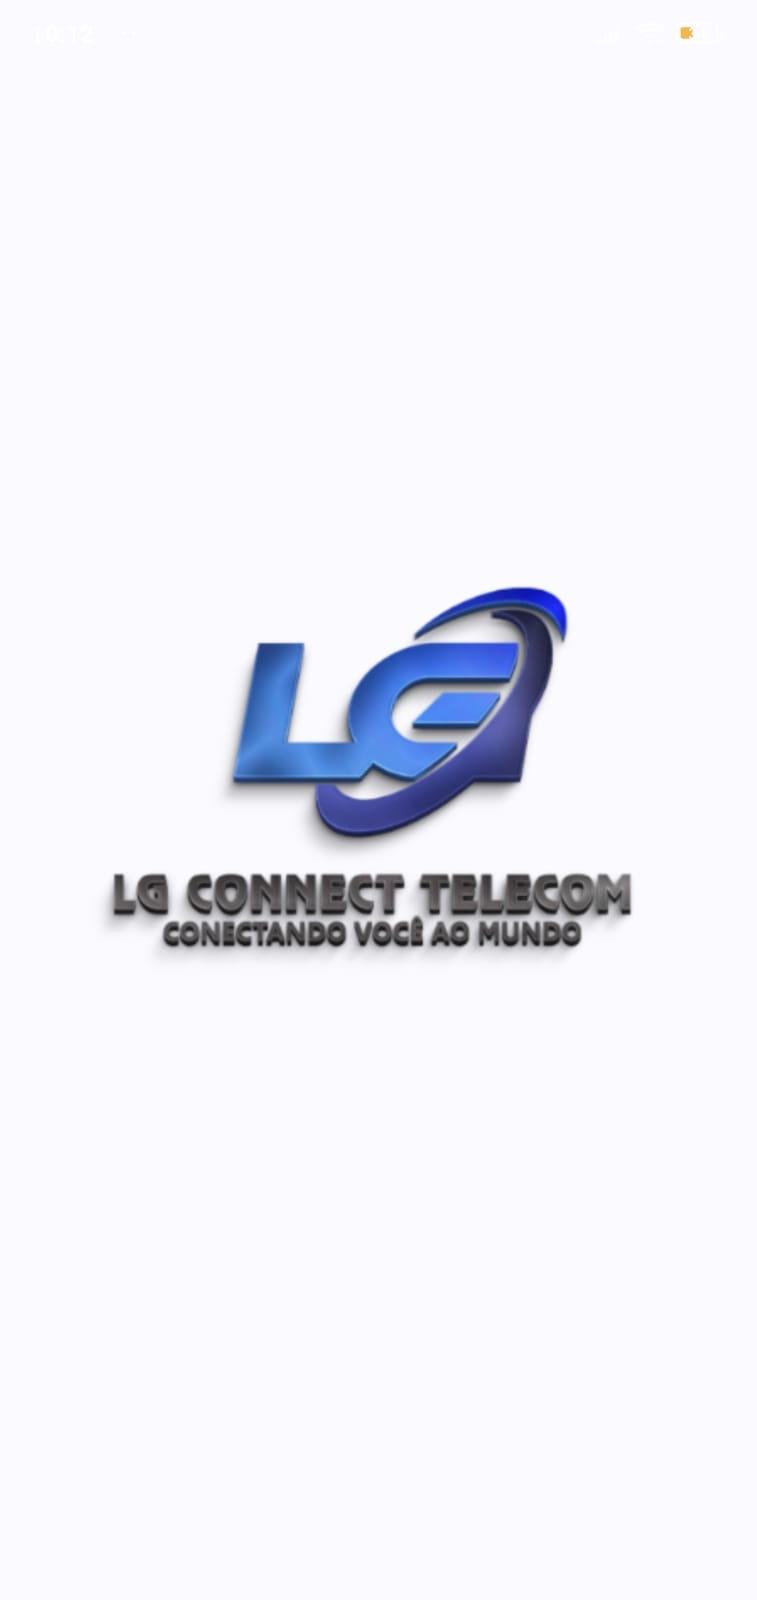 Lg connect